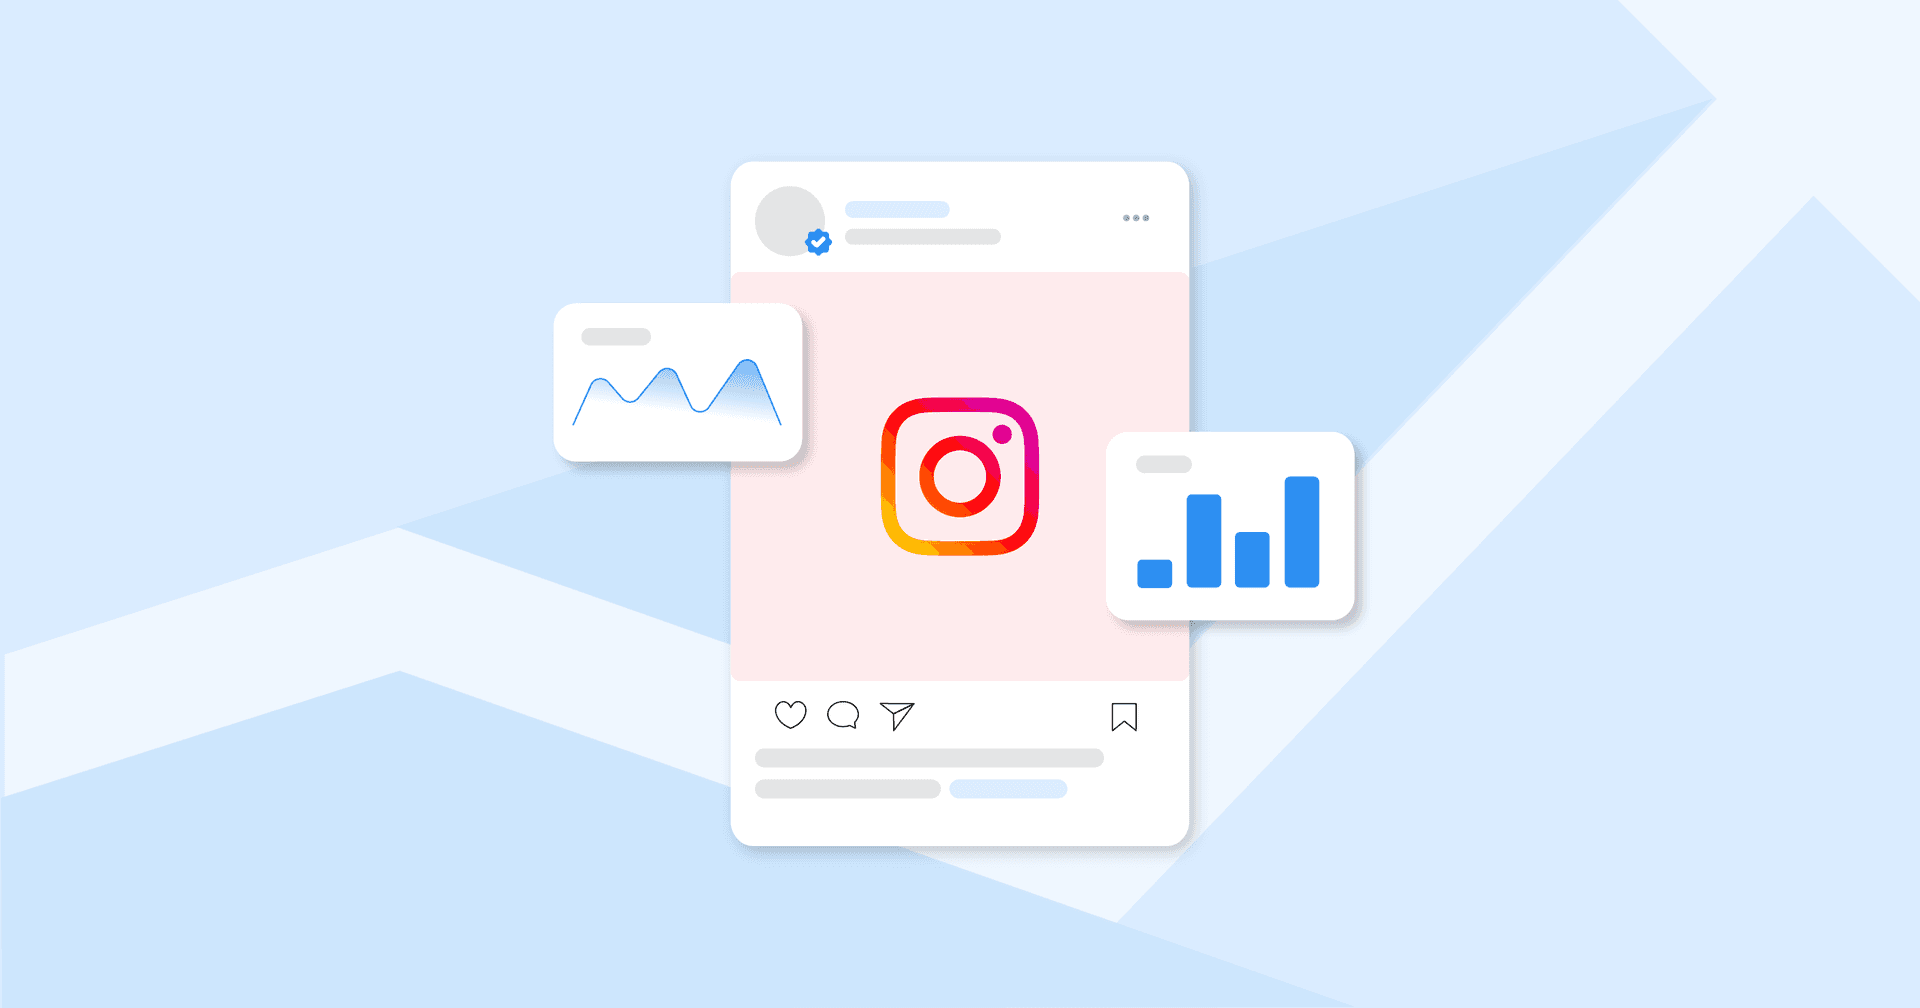 How To Create an Instagram Report for Clients

